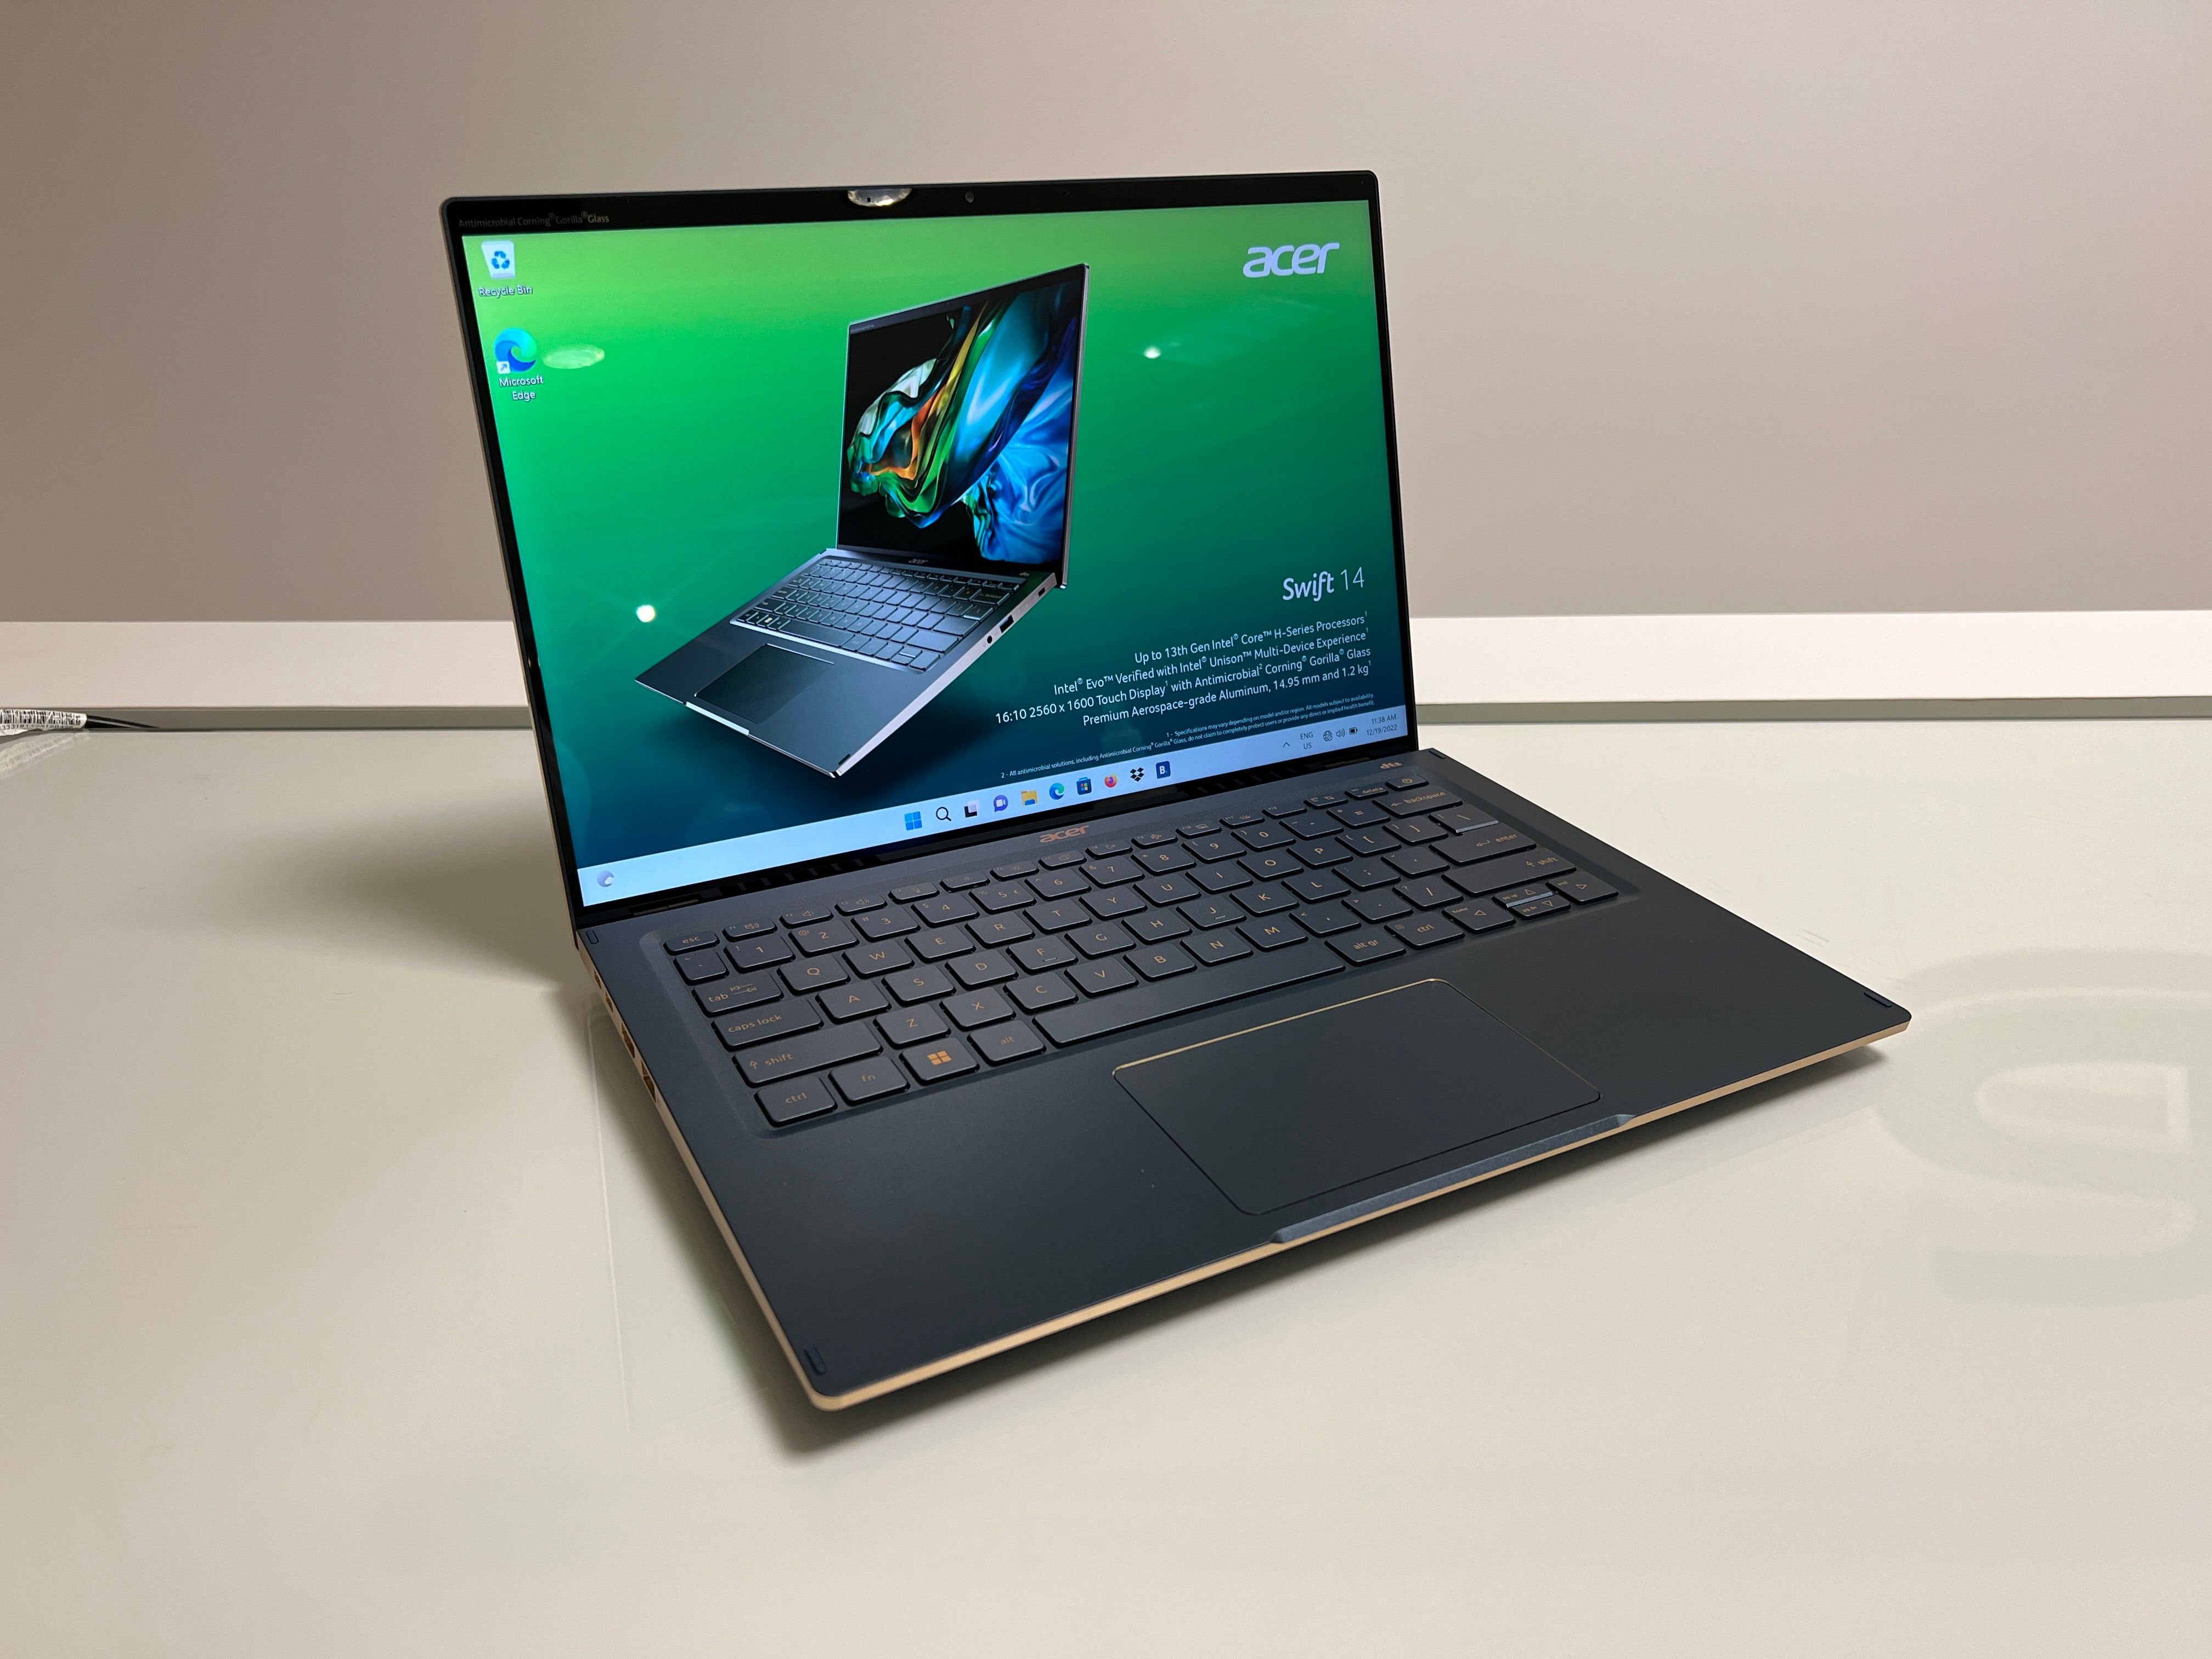 Acer Swift 14 initial review